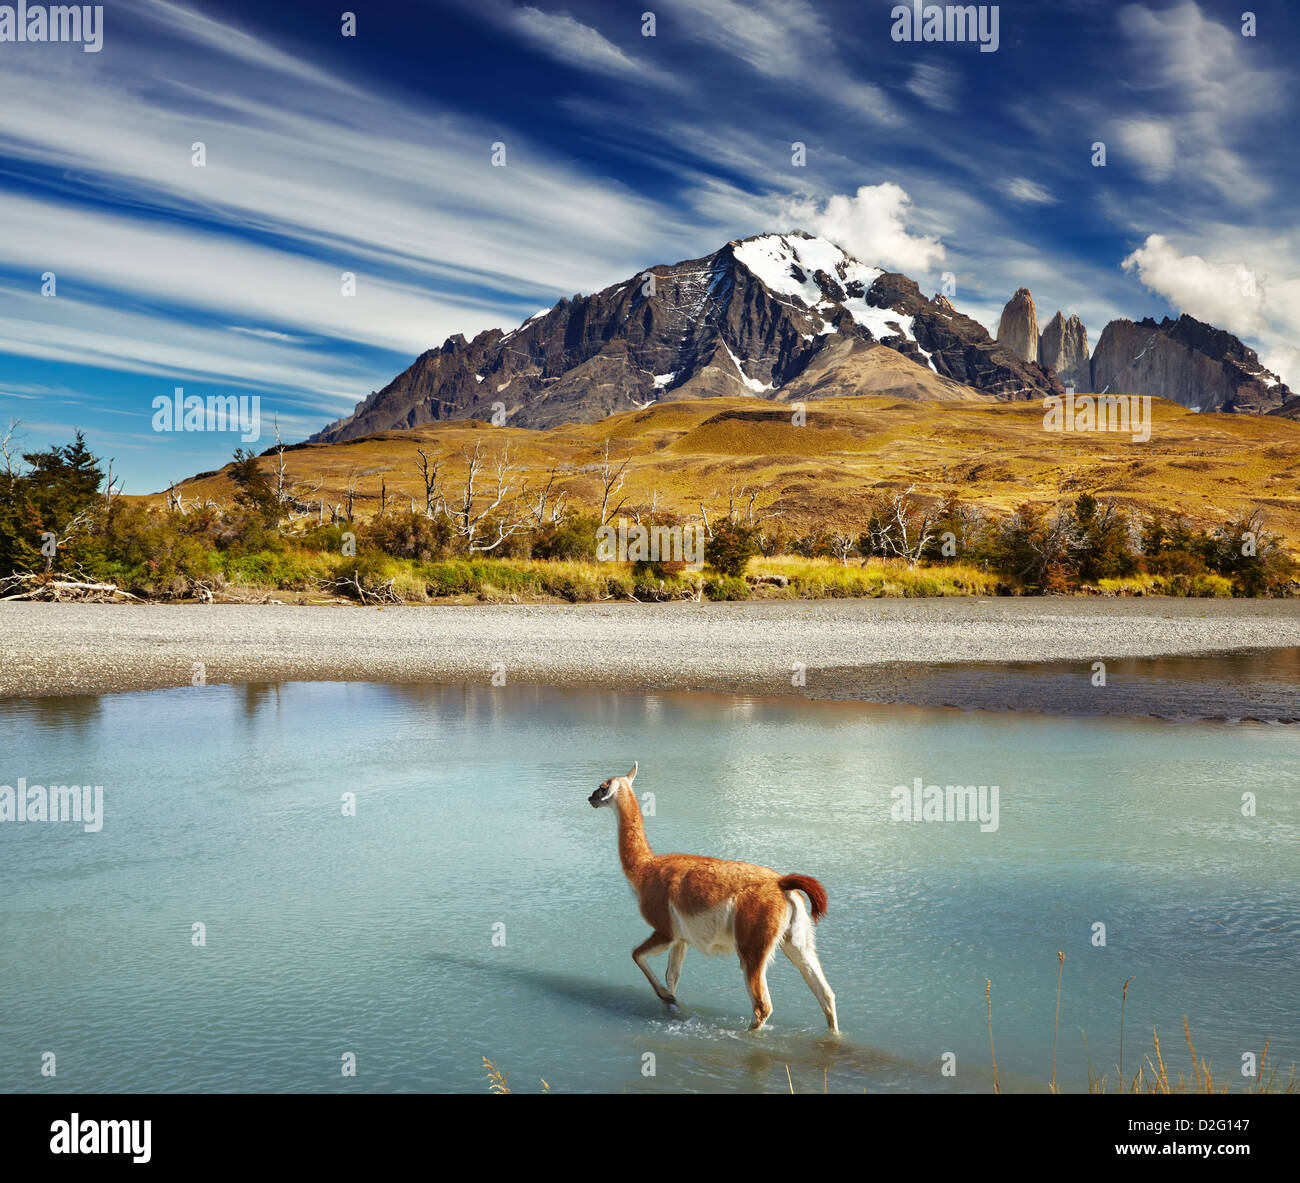 Guanaco crossing the river in Torres del Paine National Park, Patagonia, Chile Stock Photo